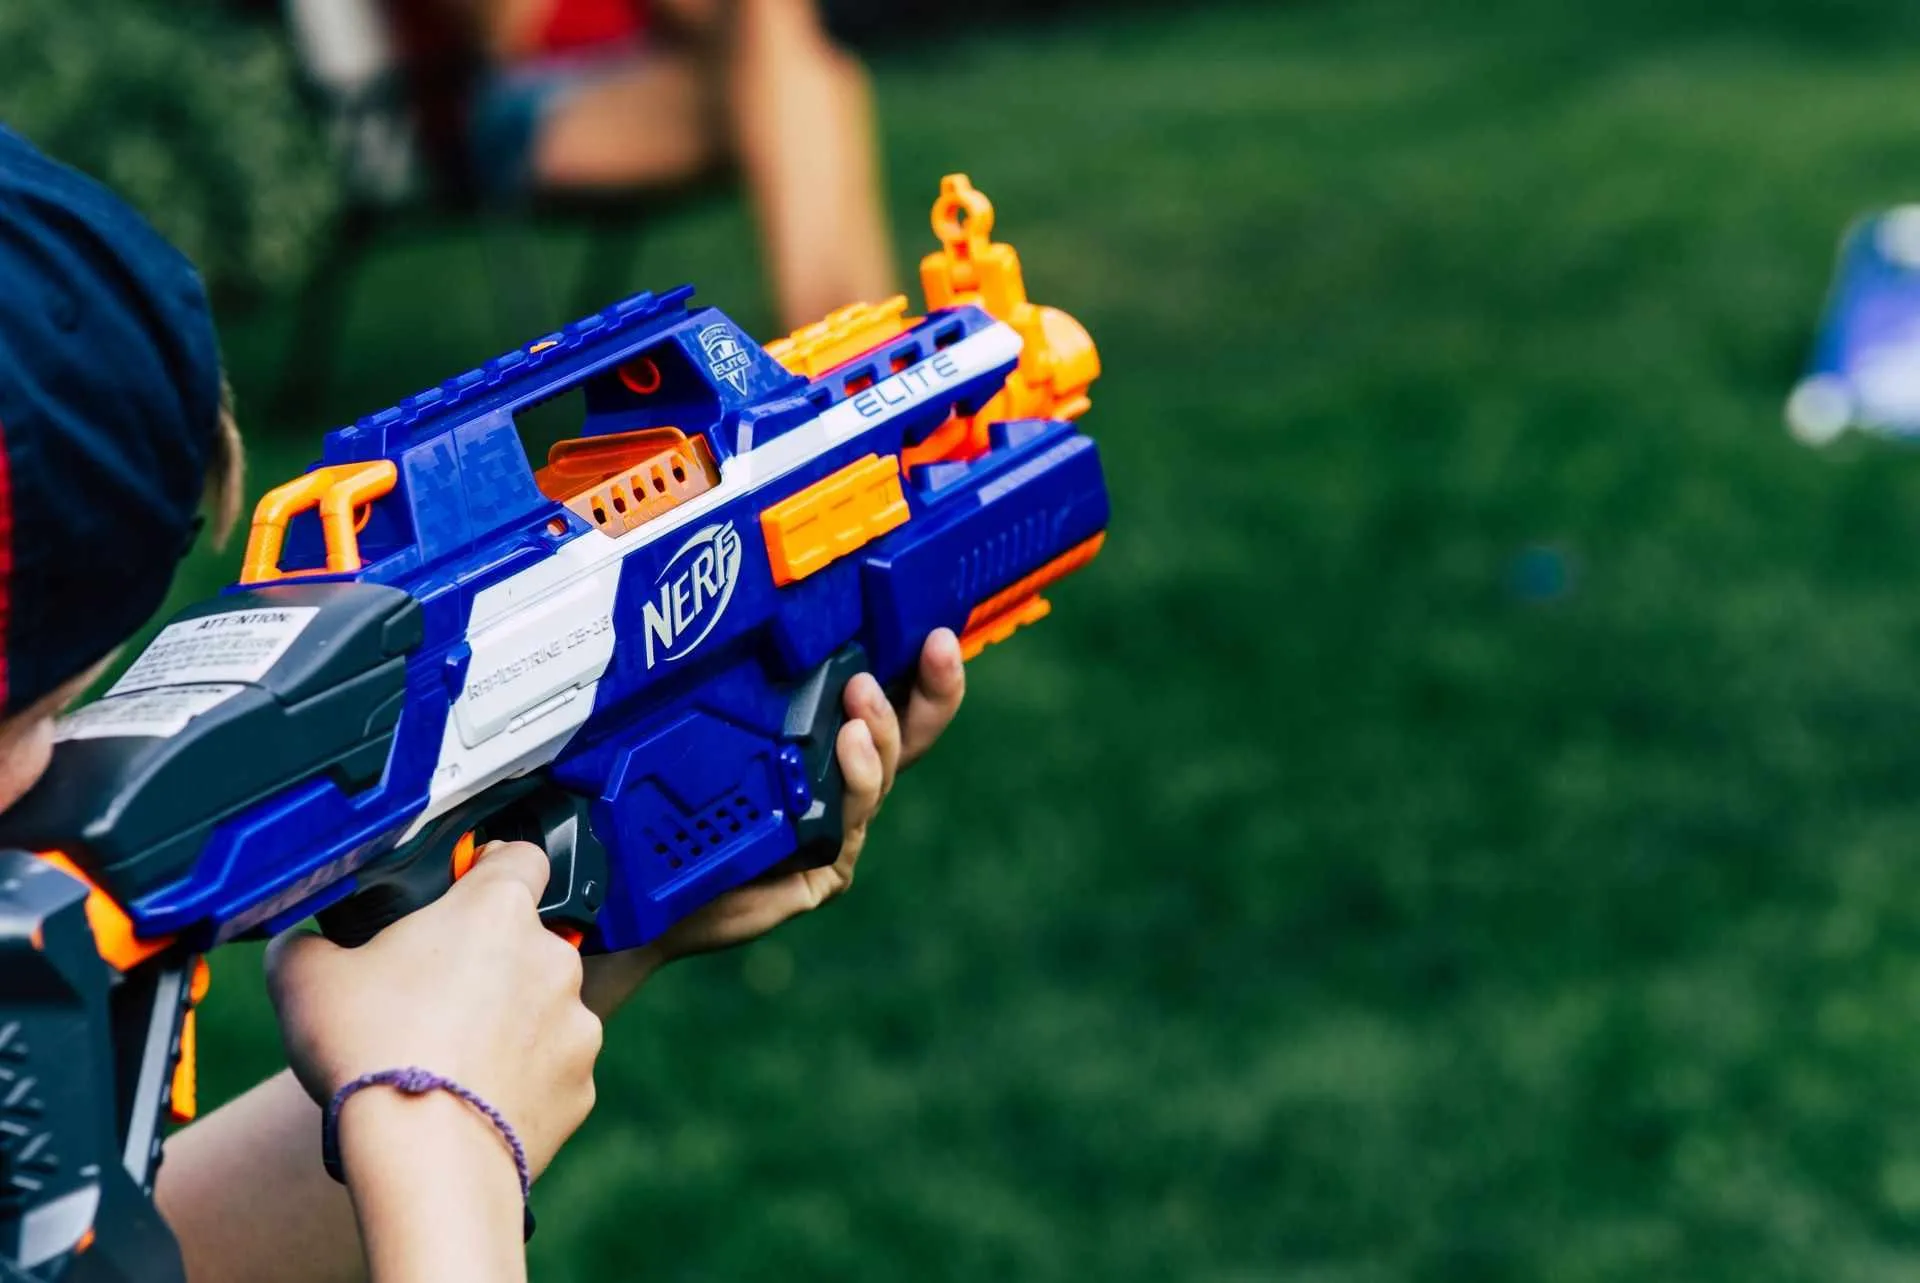 One of the most important Nerf facts is that Nerf guns cost around the same as real guns.